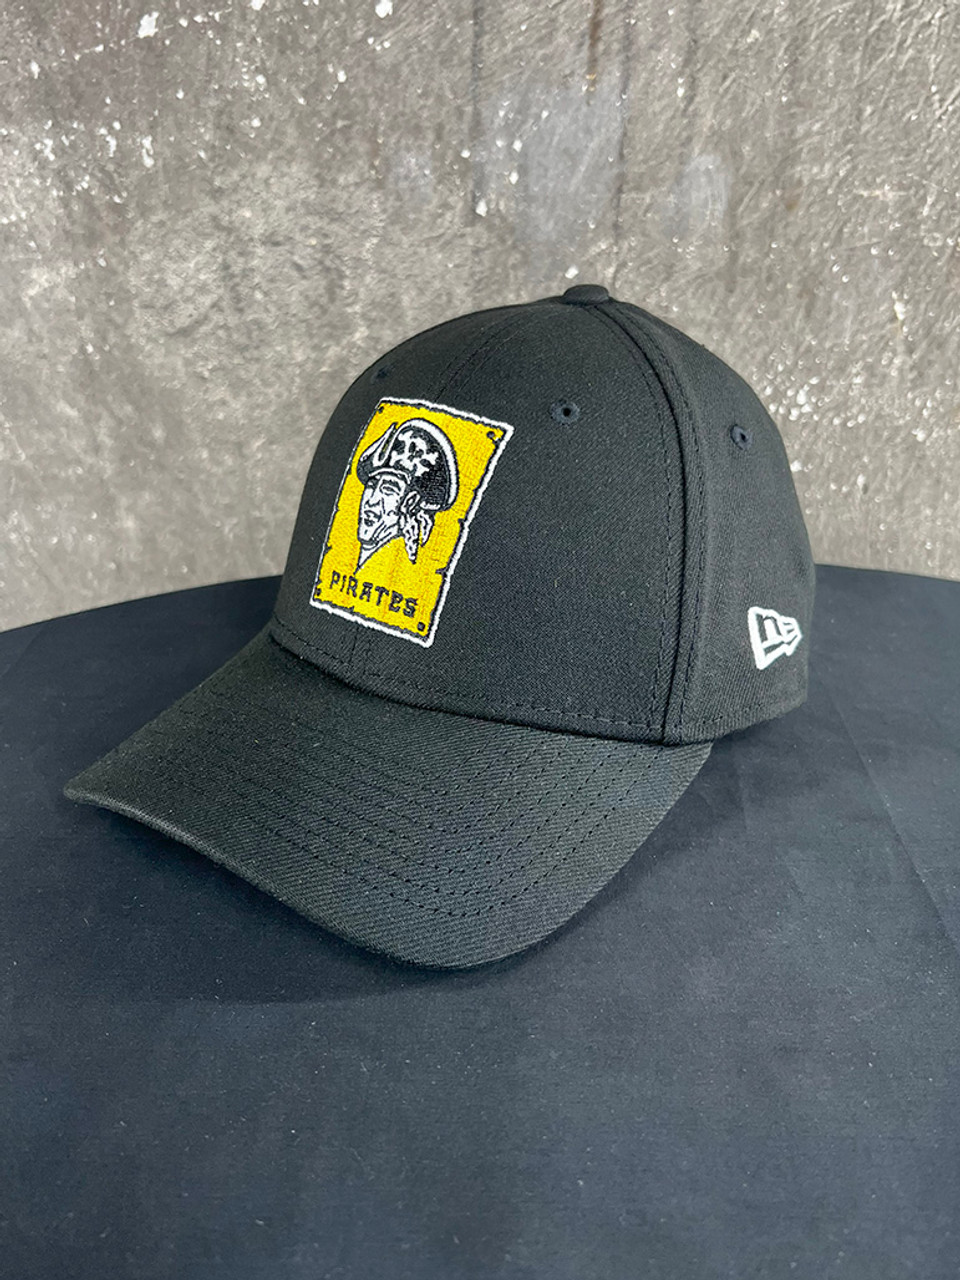 PITTSBURGH PIRATES - Cooperstown Collection Baseball Hat/Cap